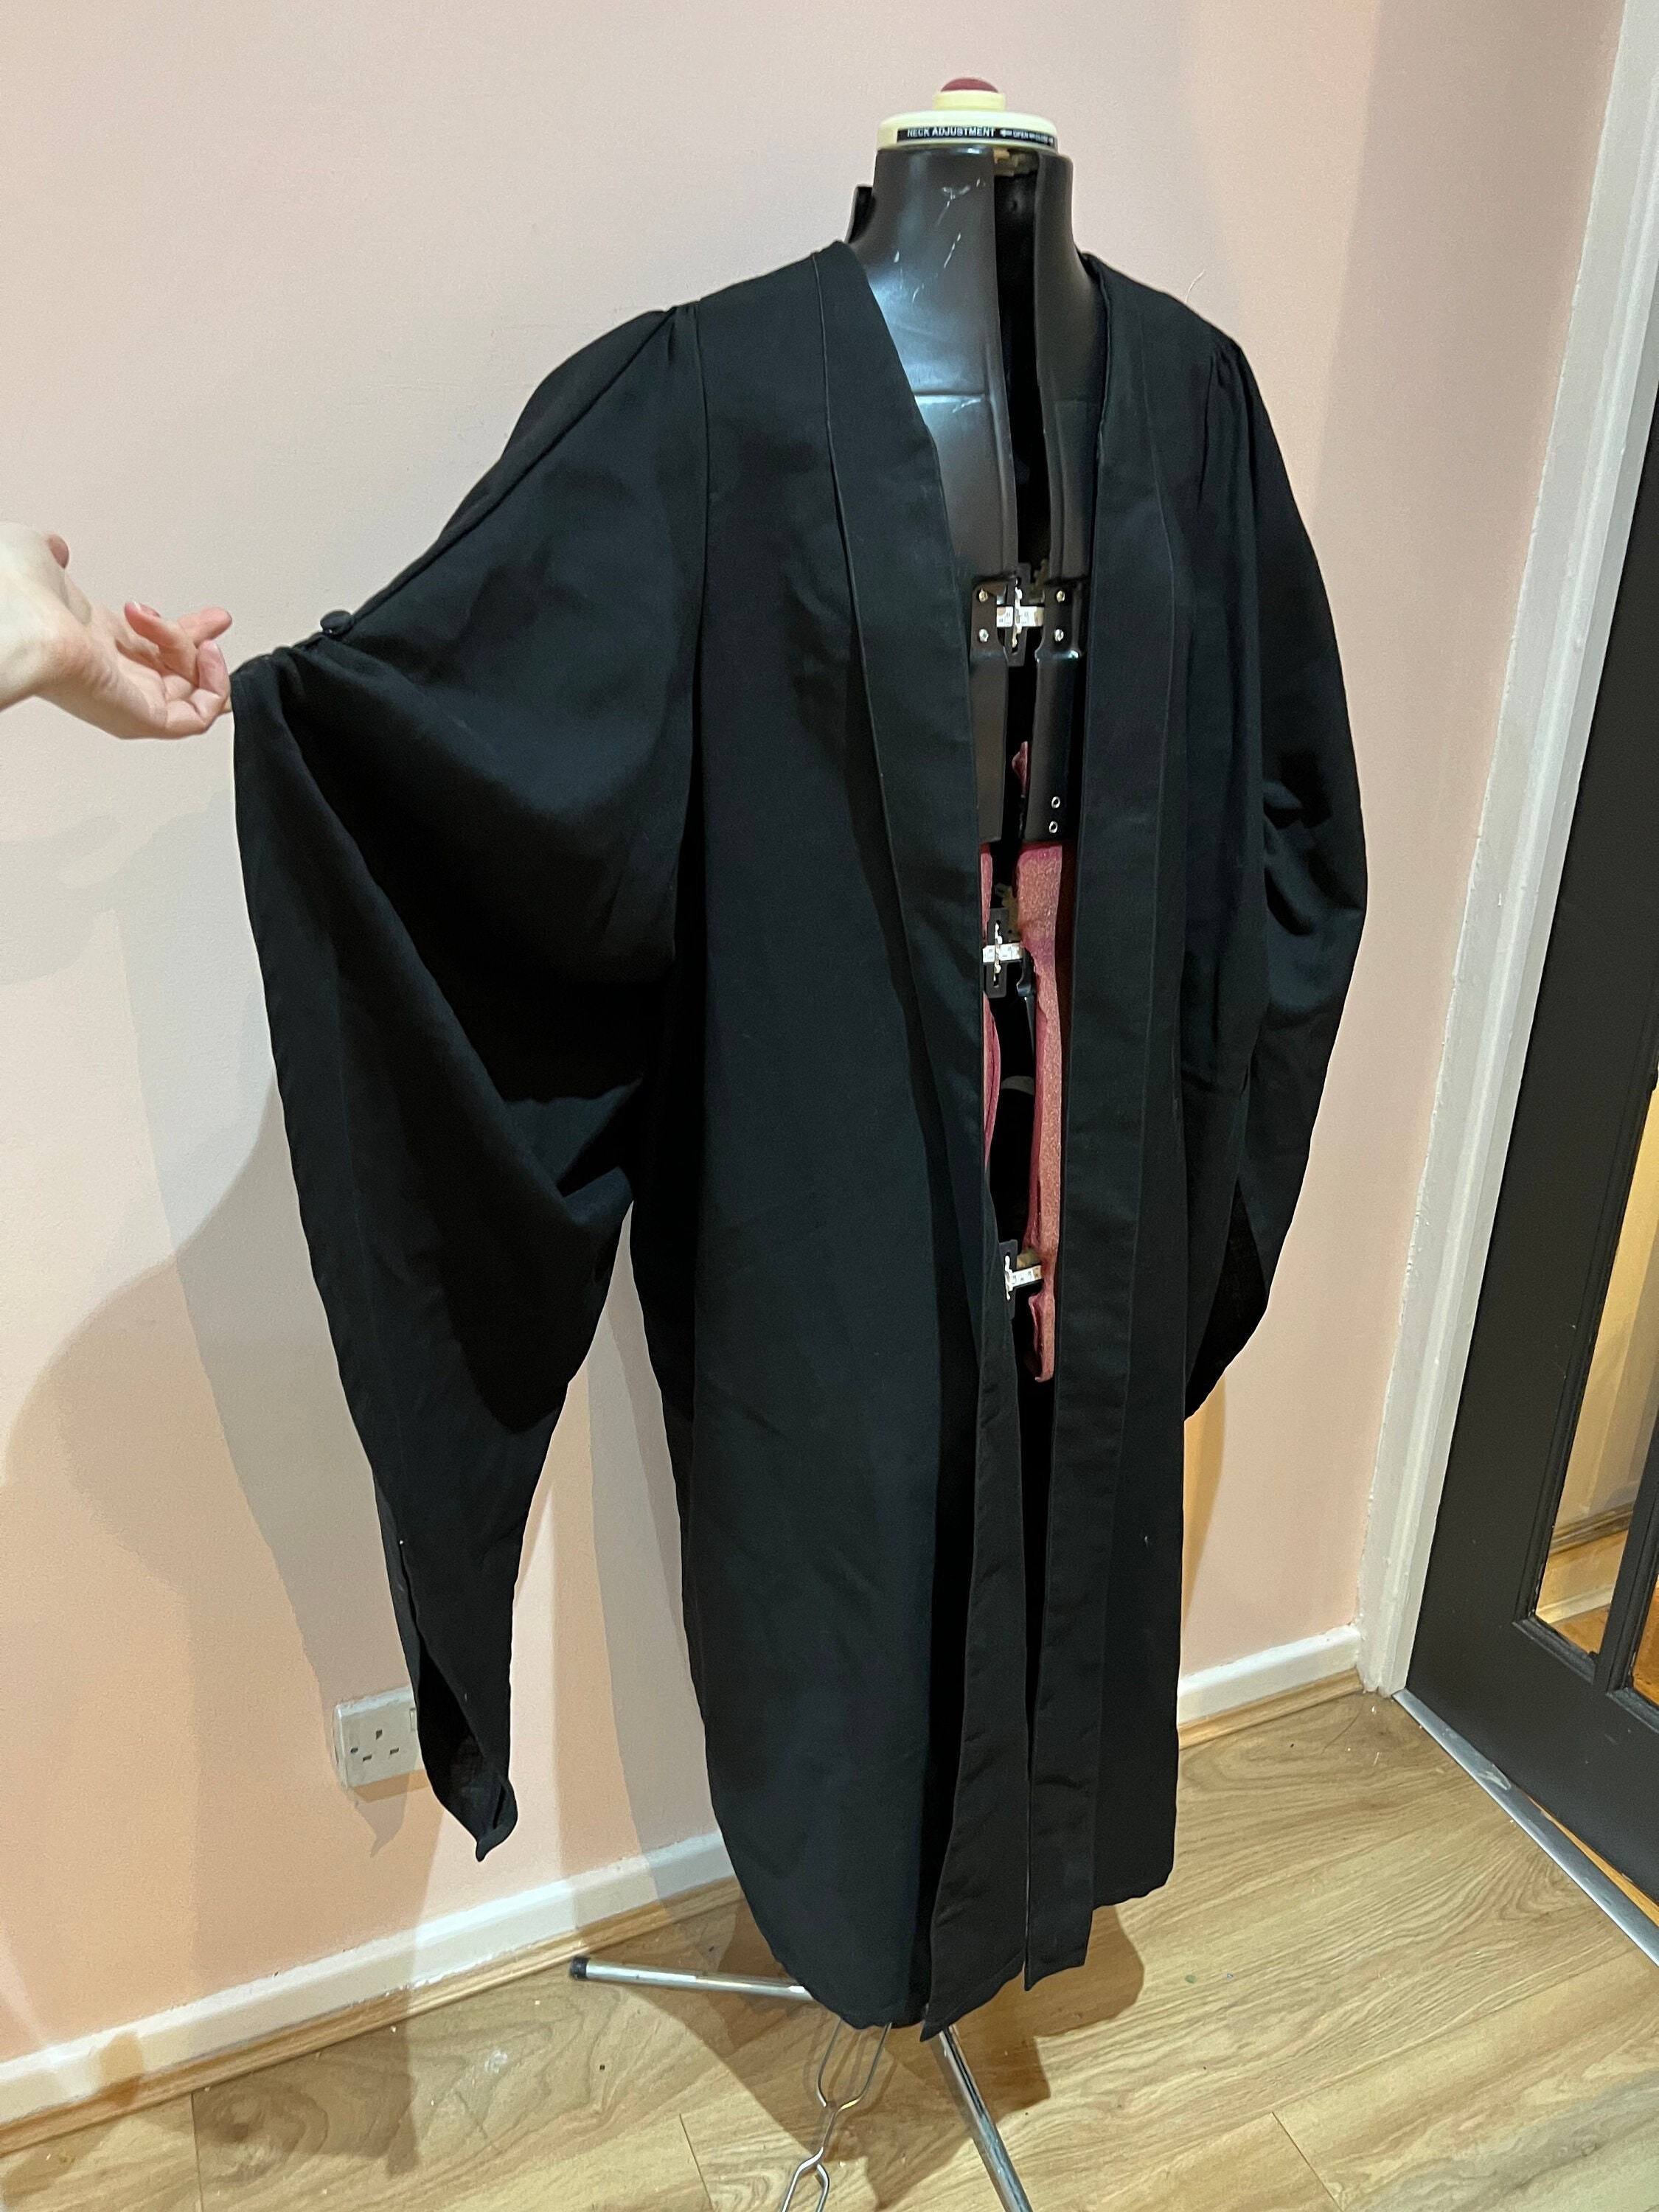 How Do You Hire a Graduation Gown? - Think Student